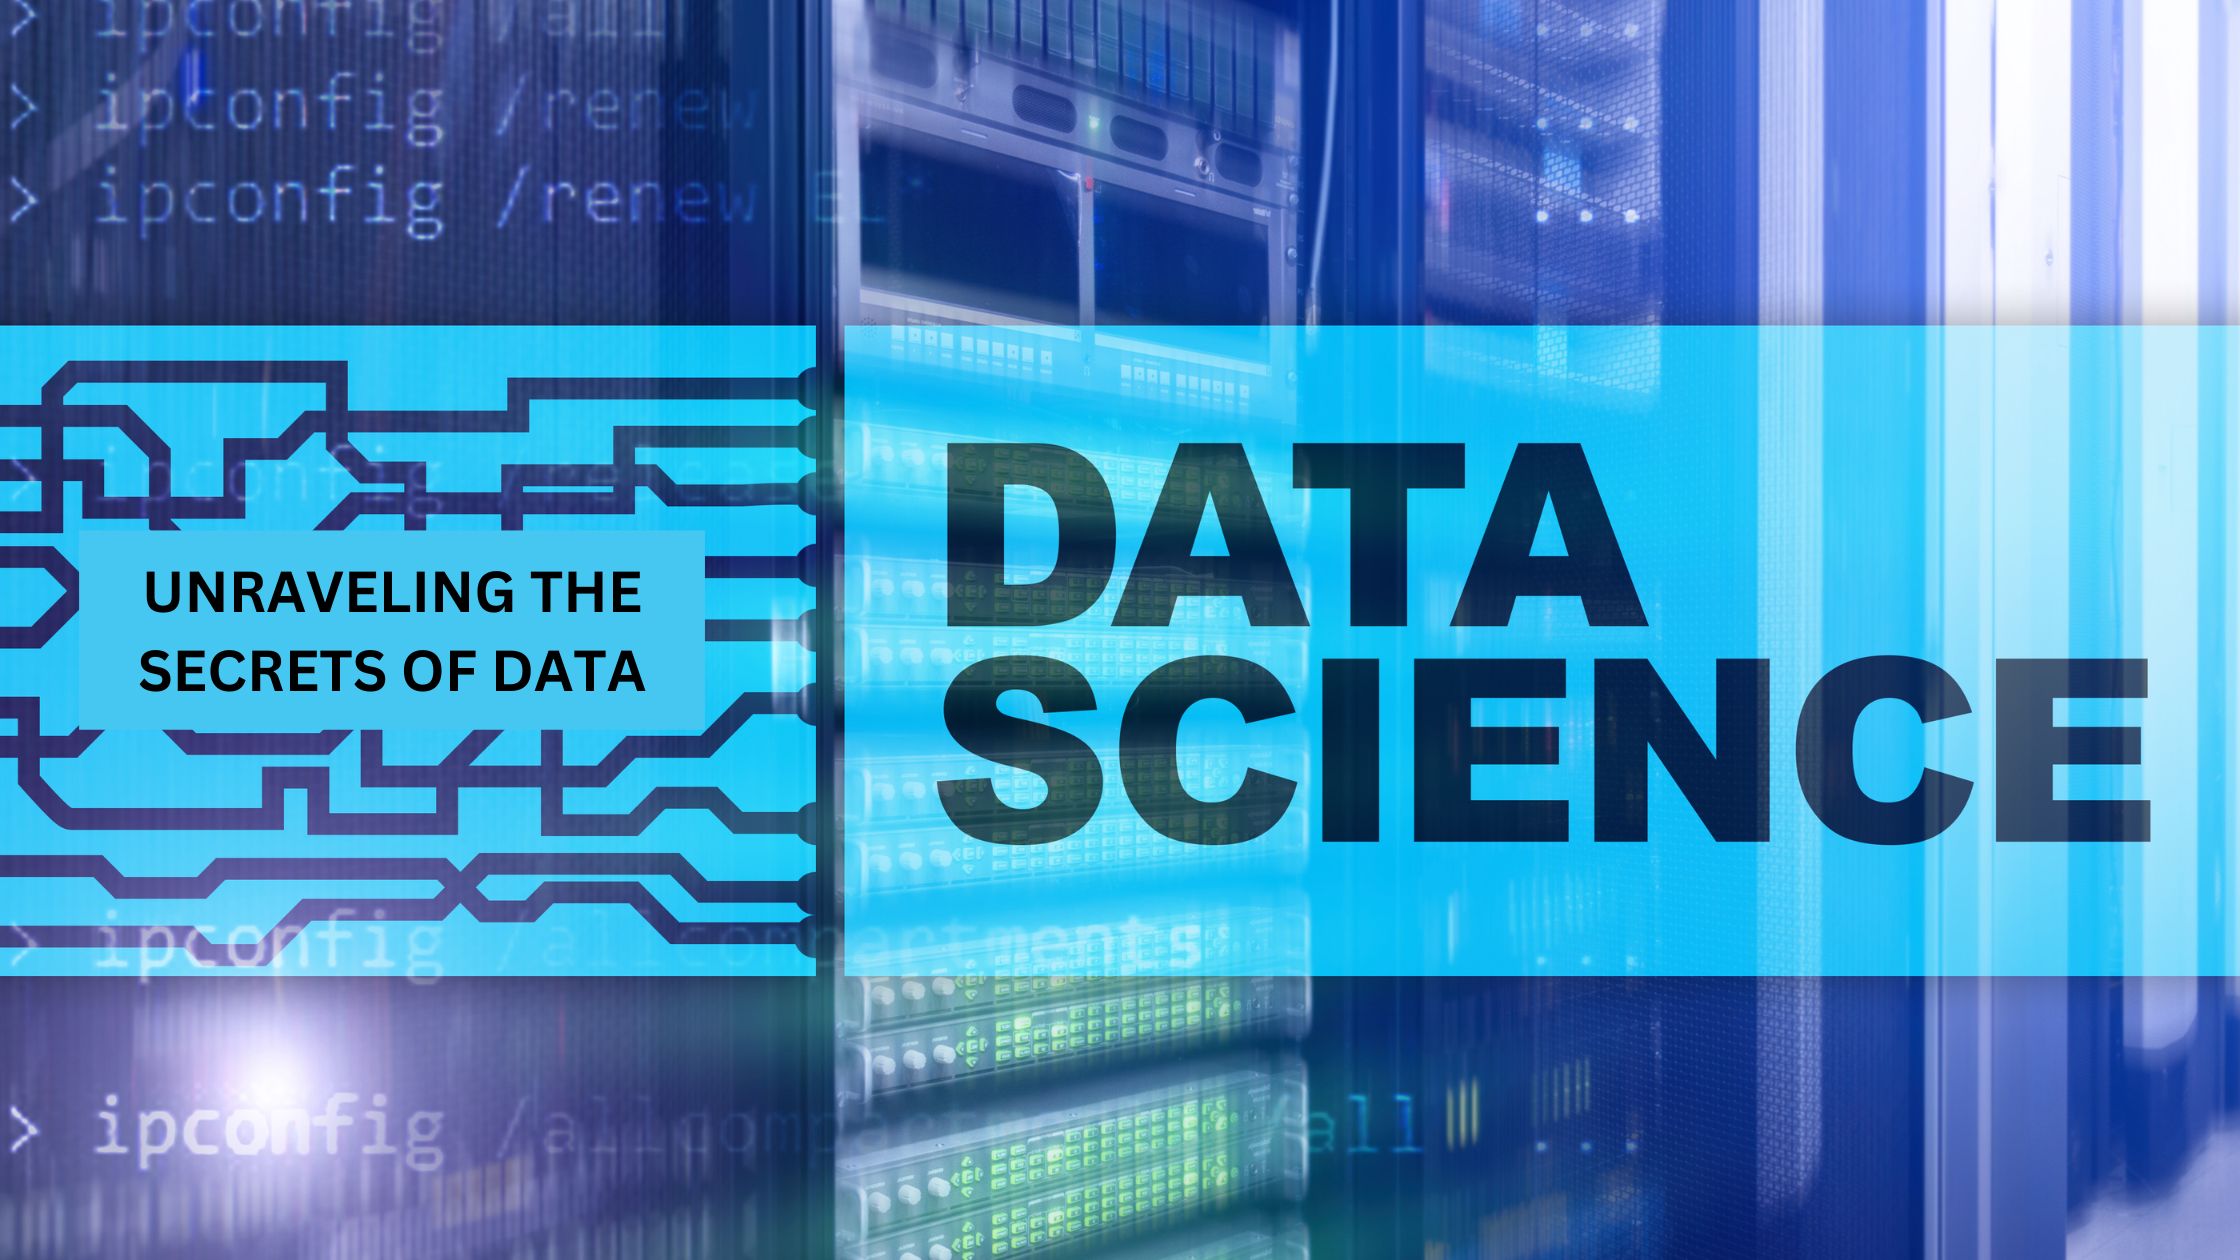 Data Science: Unraveling the Secrets of Data